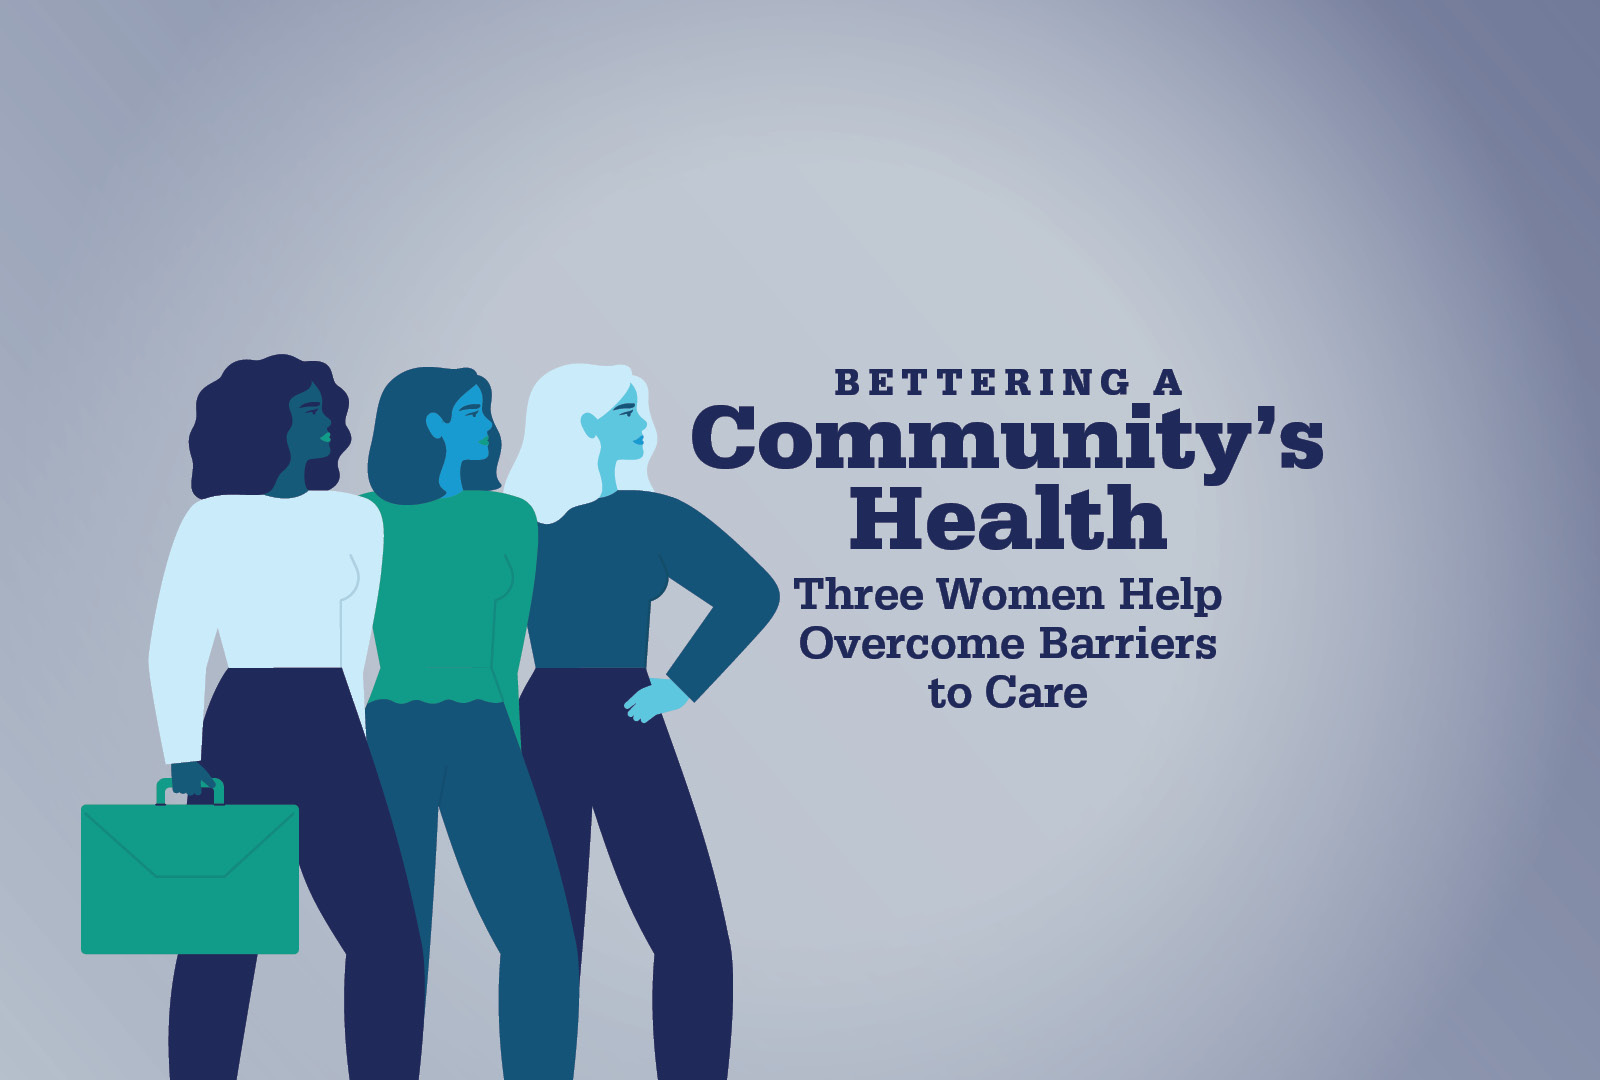 Bettering a Community's Health Three Women Help Overcome Barriers to Care